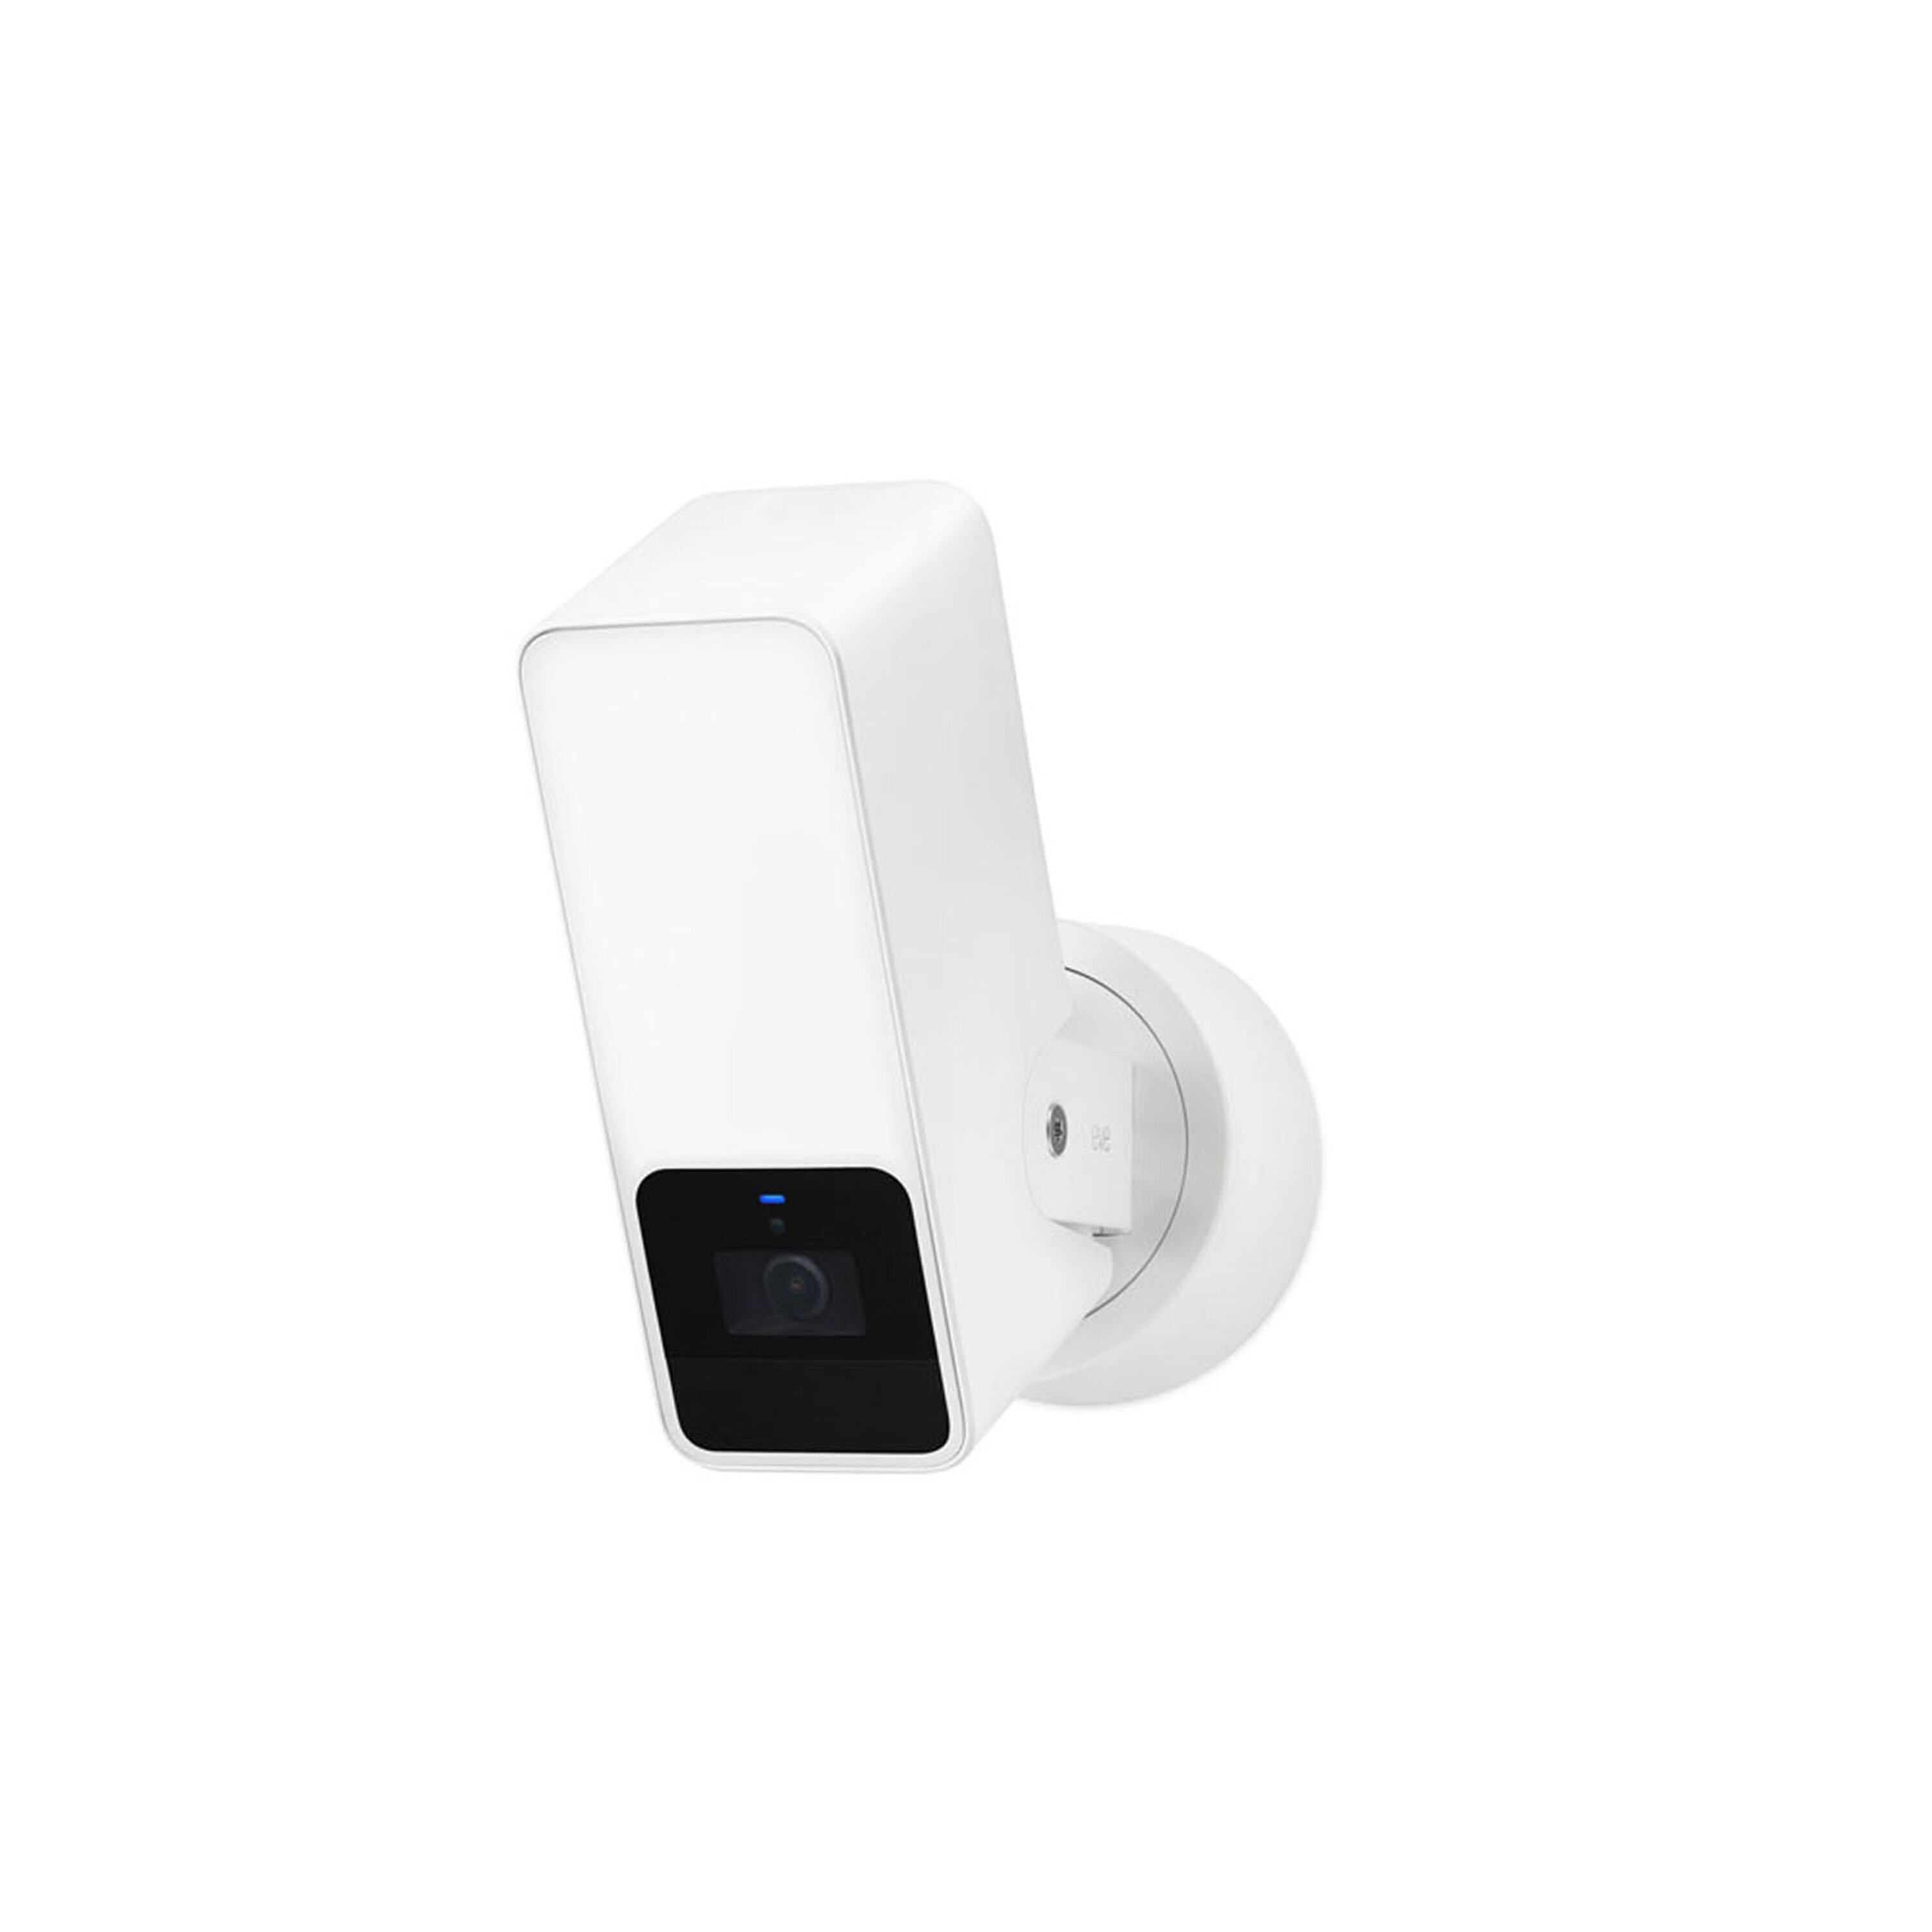 Ring Indoor Cam (2nd Gen) - Plug-In Smart Security Wifi Video Camera, with  Included Privacy Cover, Night Vision, White B0B6GLQJMV - The Home Depot